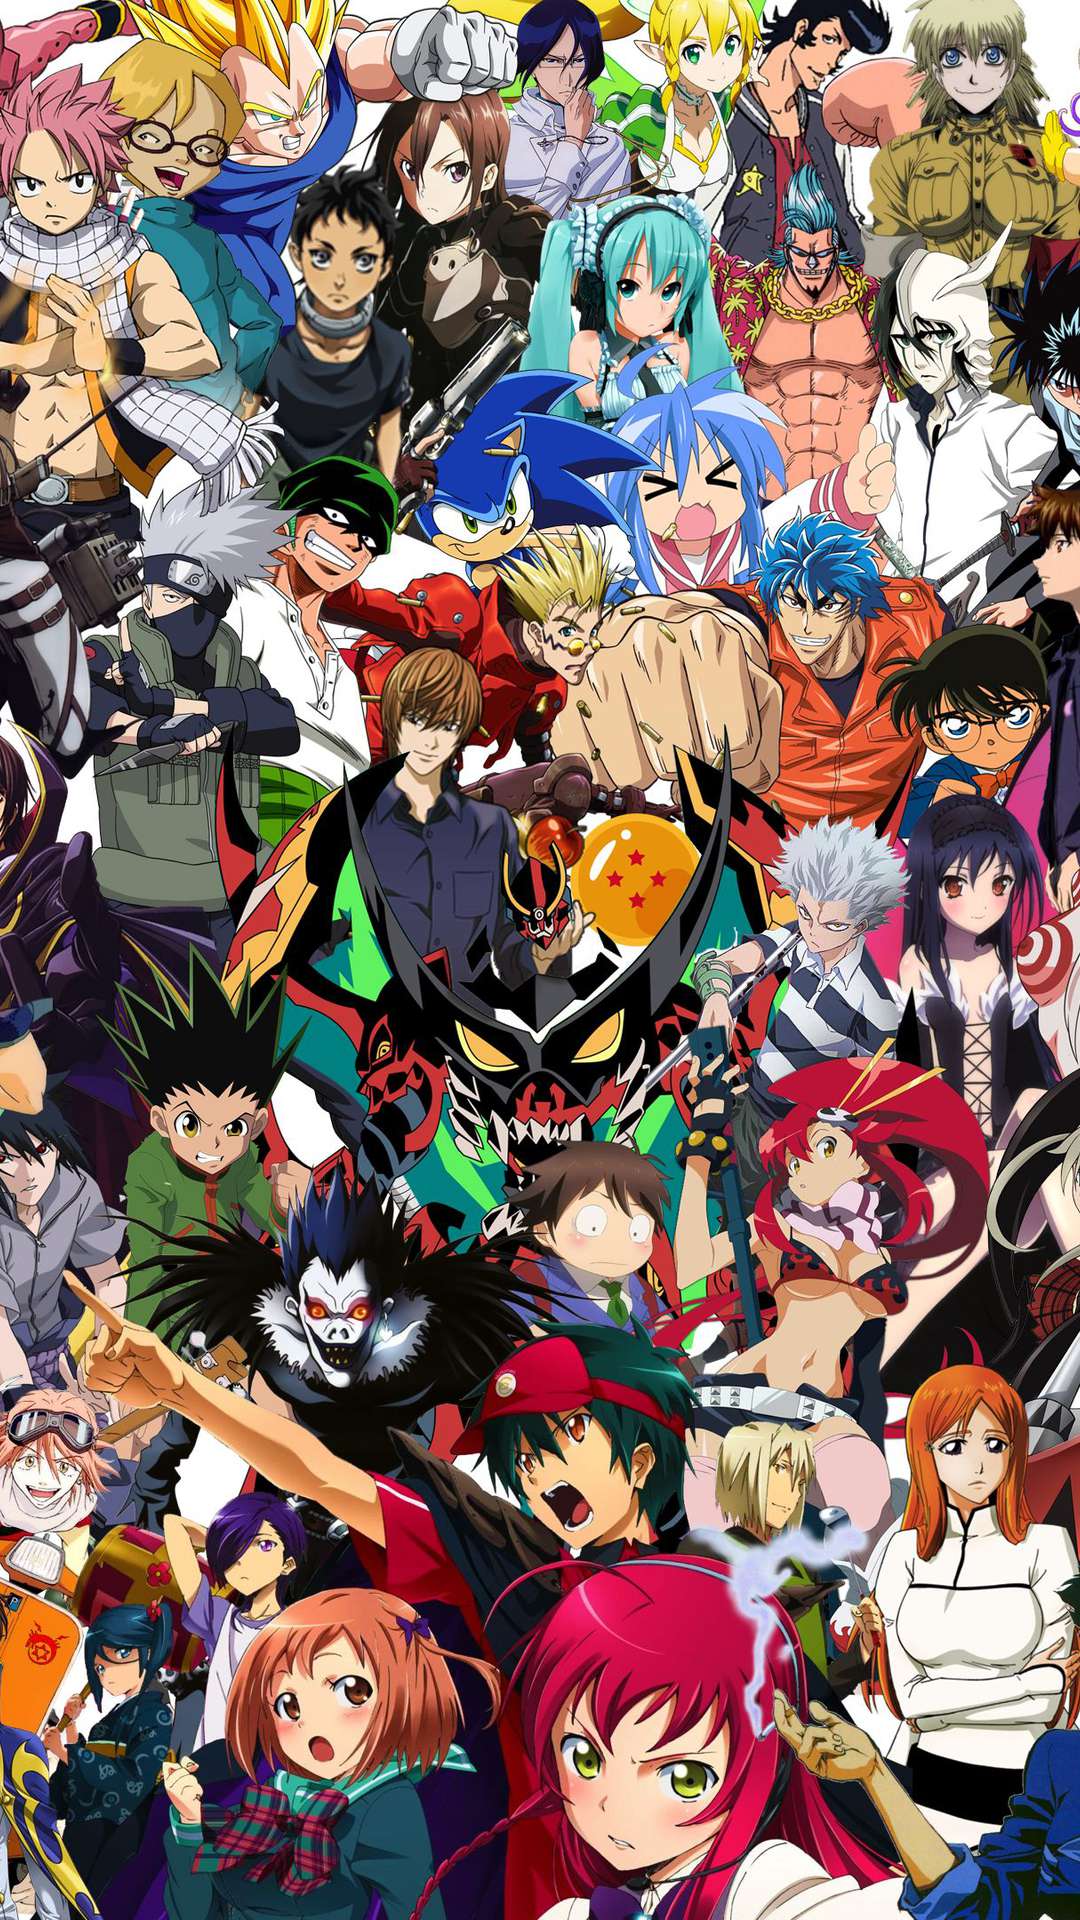 Anime Collage by Coalonfire on DeviantArt